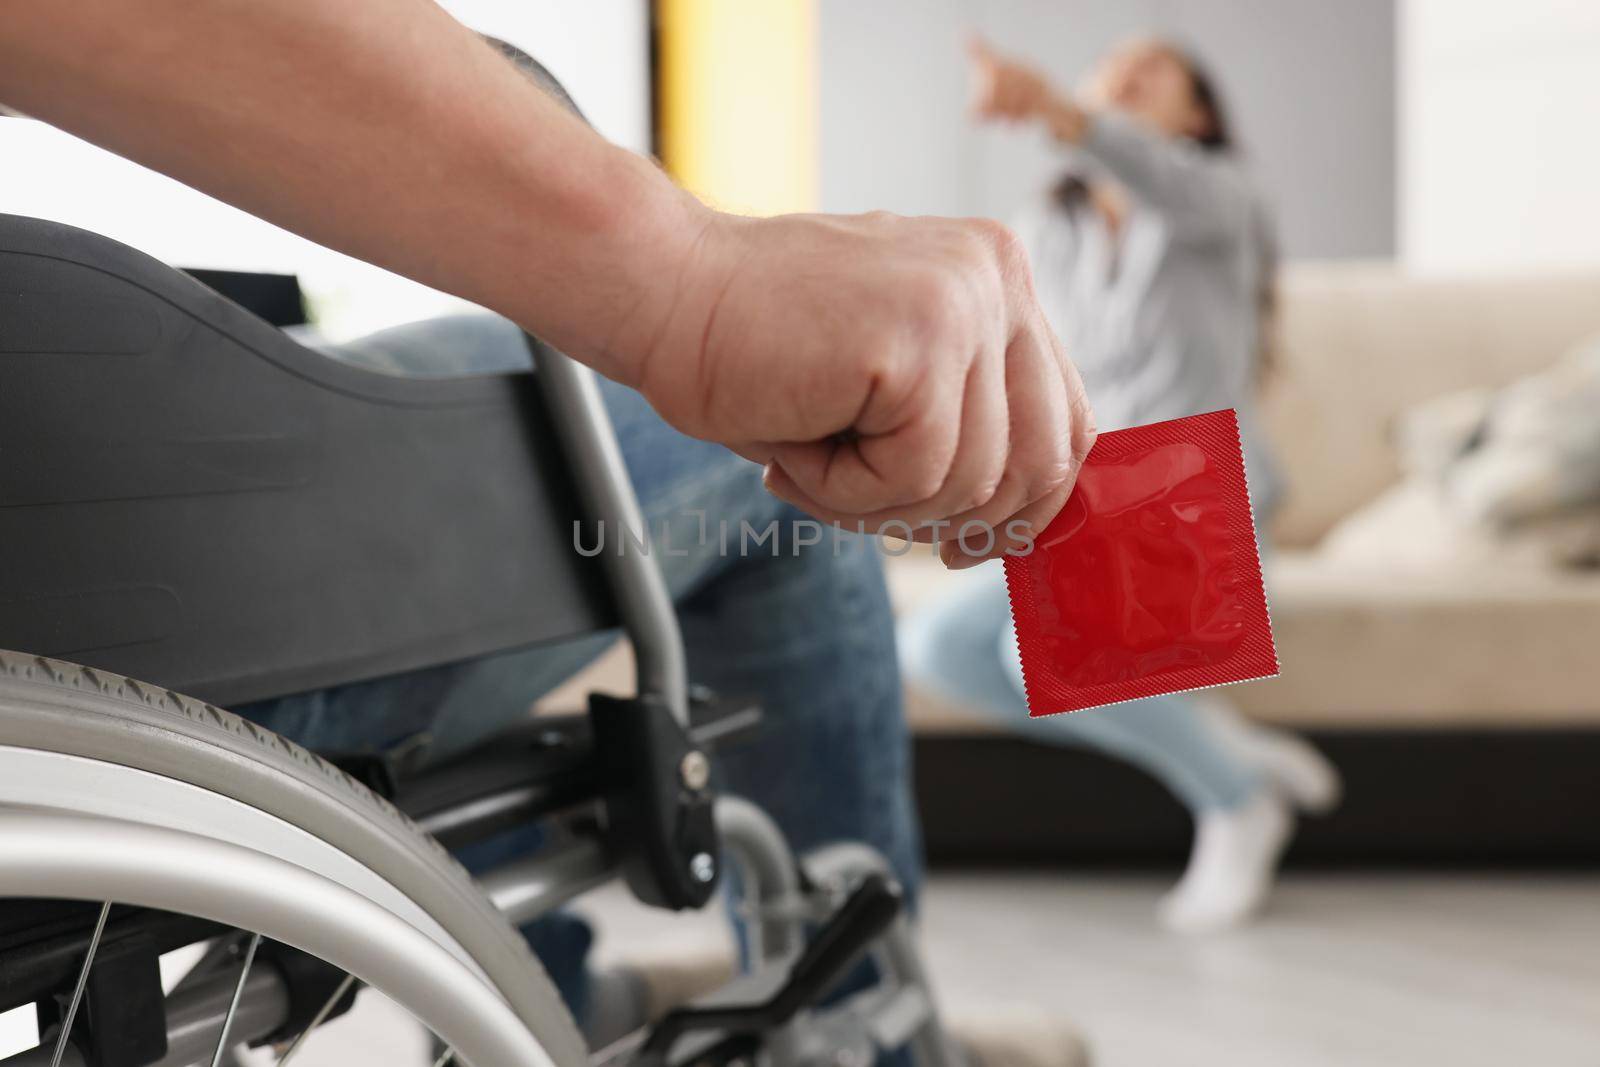 Man sit in wheelchair hold package of condom, woman laugh on couch pointing with finger by kuprevich